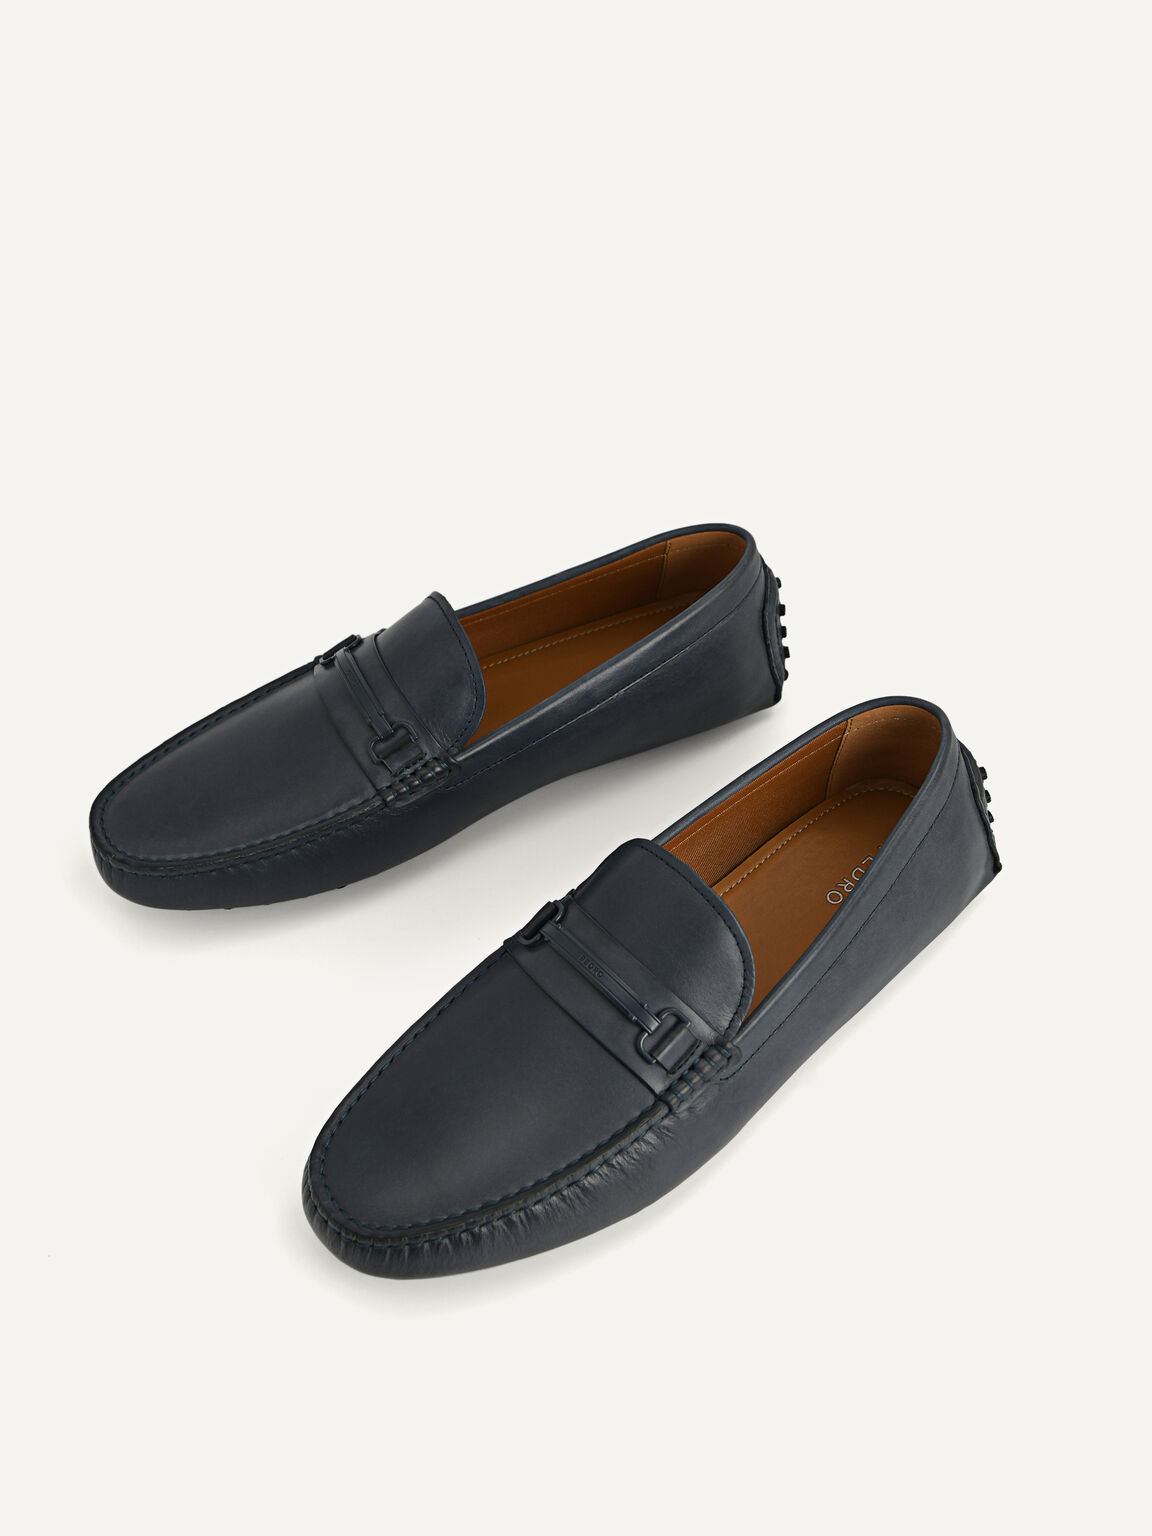 Leather Moccasins with Metal Bit, Navy